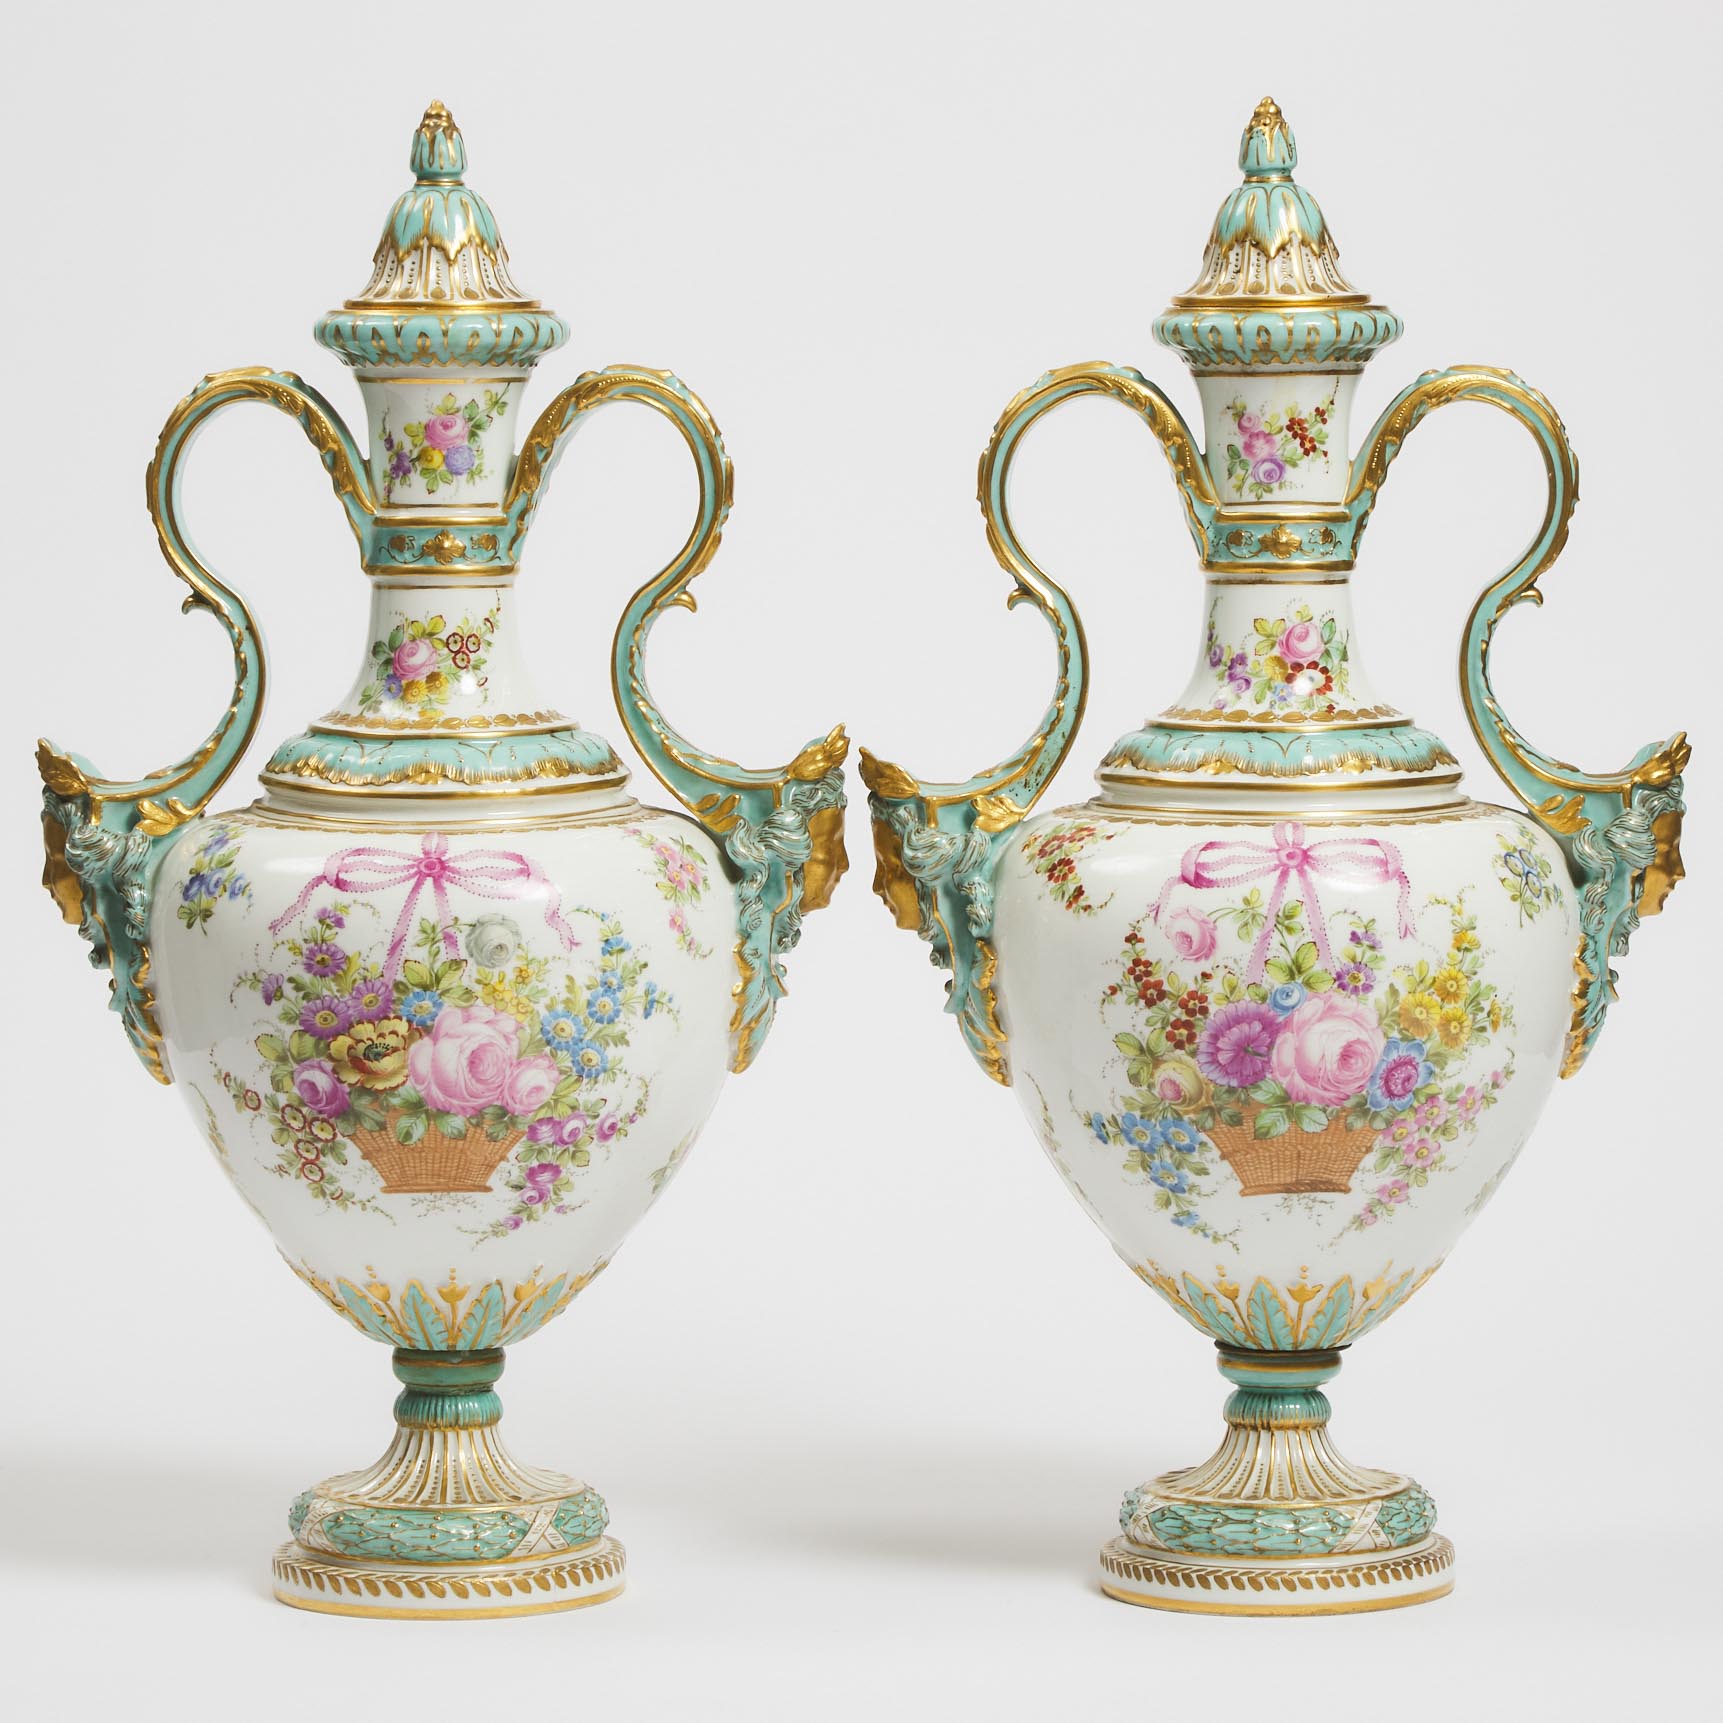 Pair of 'Sèvres' Two-Handled Vases and Covers, early 20th century